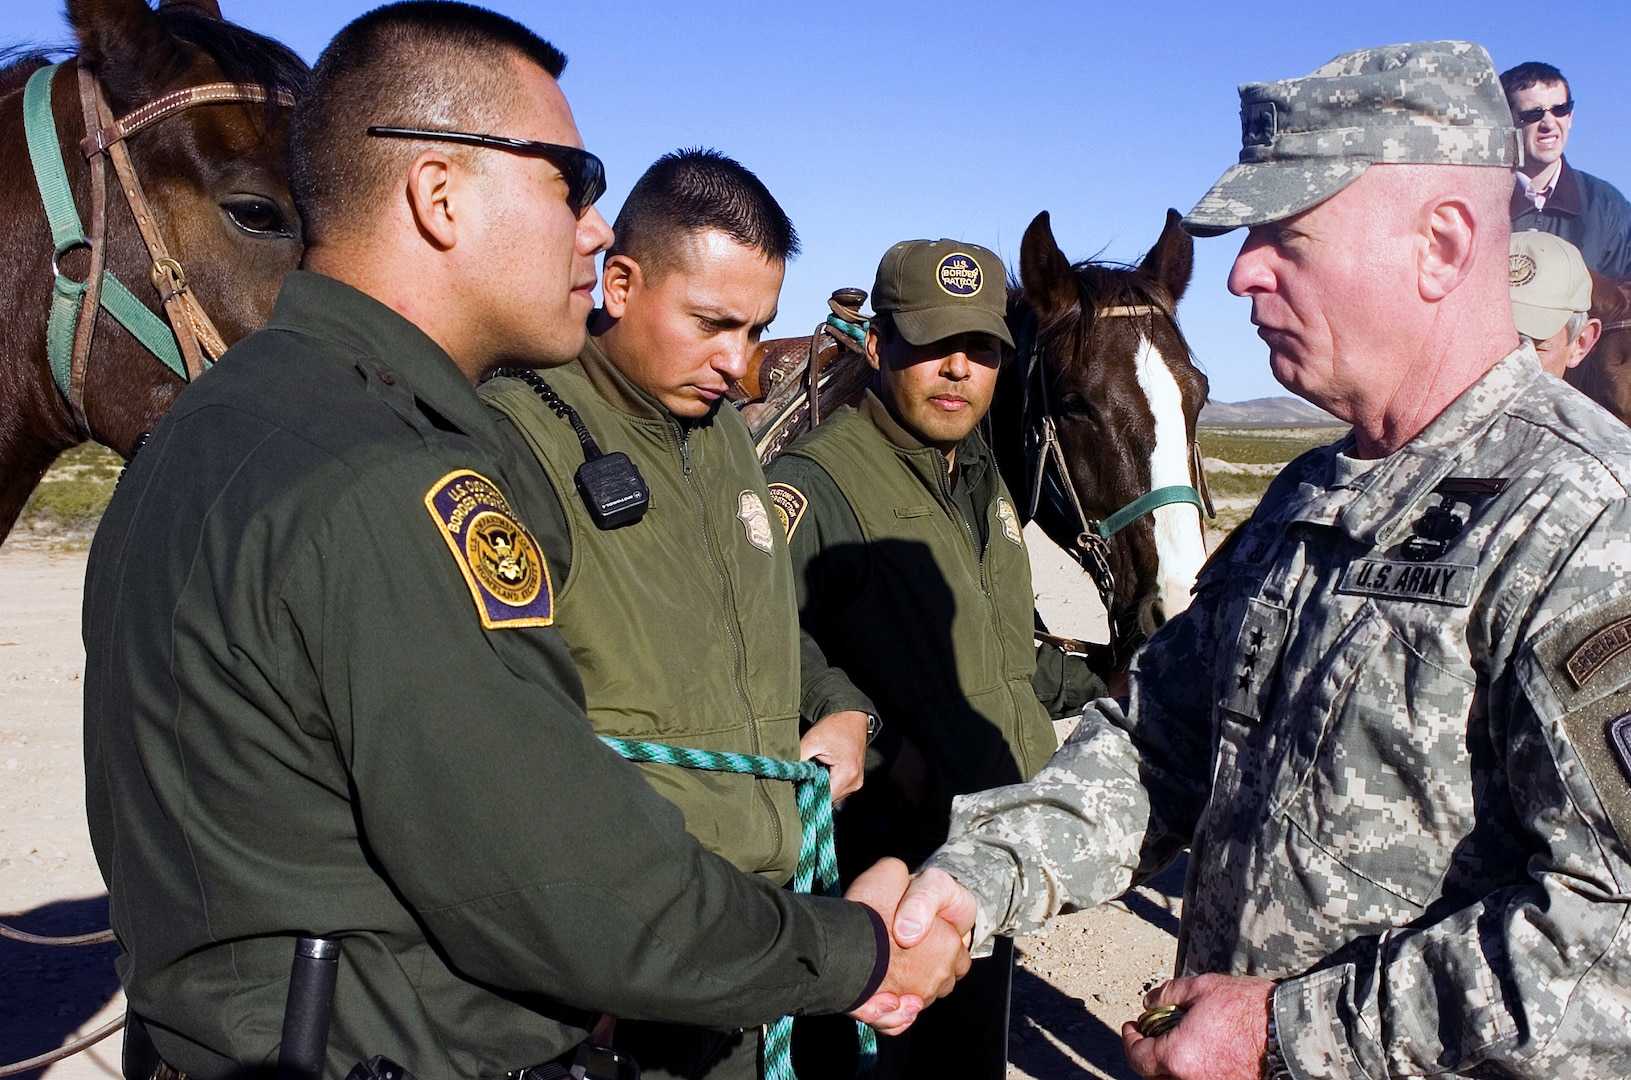 Lt. Gen. H Steven Blum, chief, National Guard Bureau, talks with Border Patrol agents during a visit to the U.S. border with Mexico near Columbus, N.M., on Nov. 29, 2006. Up to 6,000 National Guard troops are helping the Border Patrol secure the nation's southern border in Operation Jump Start.